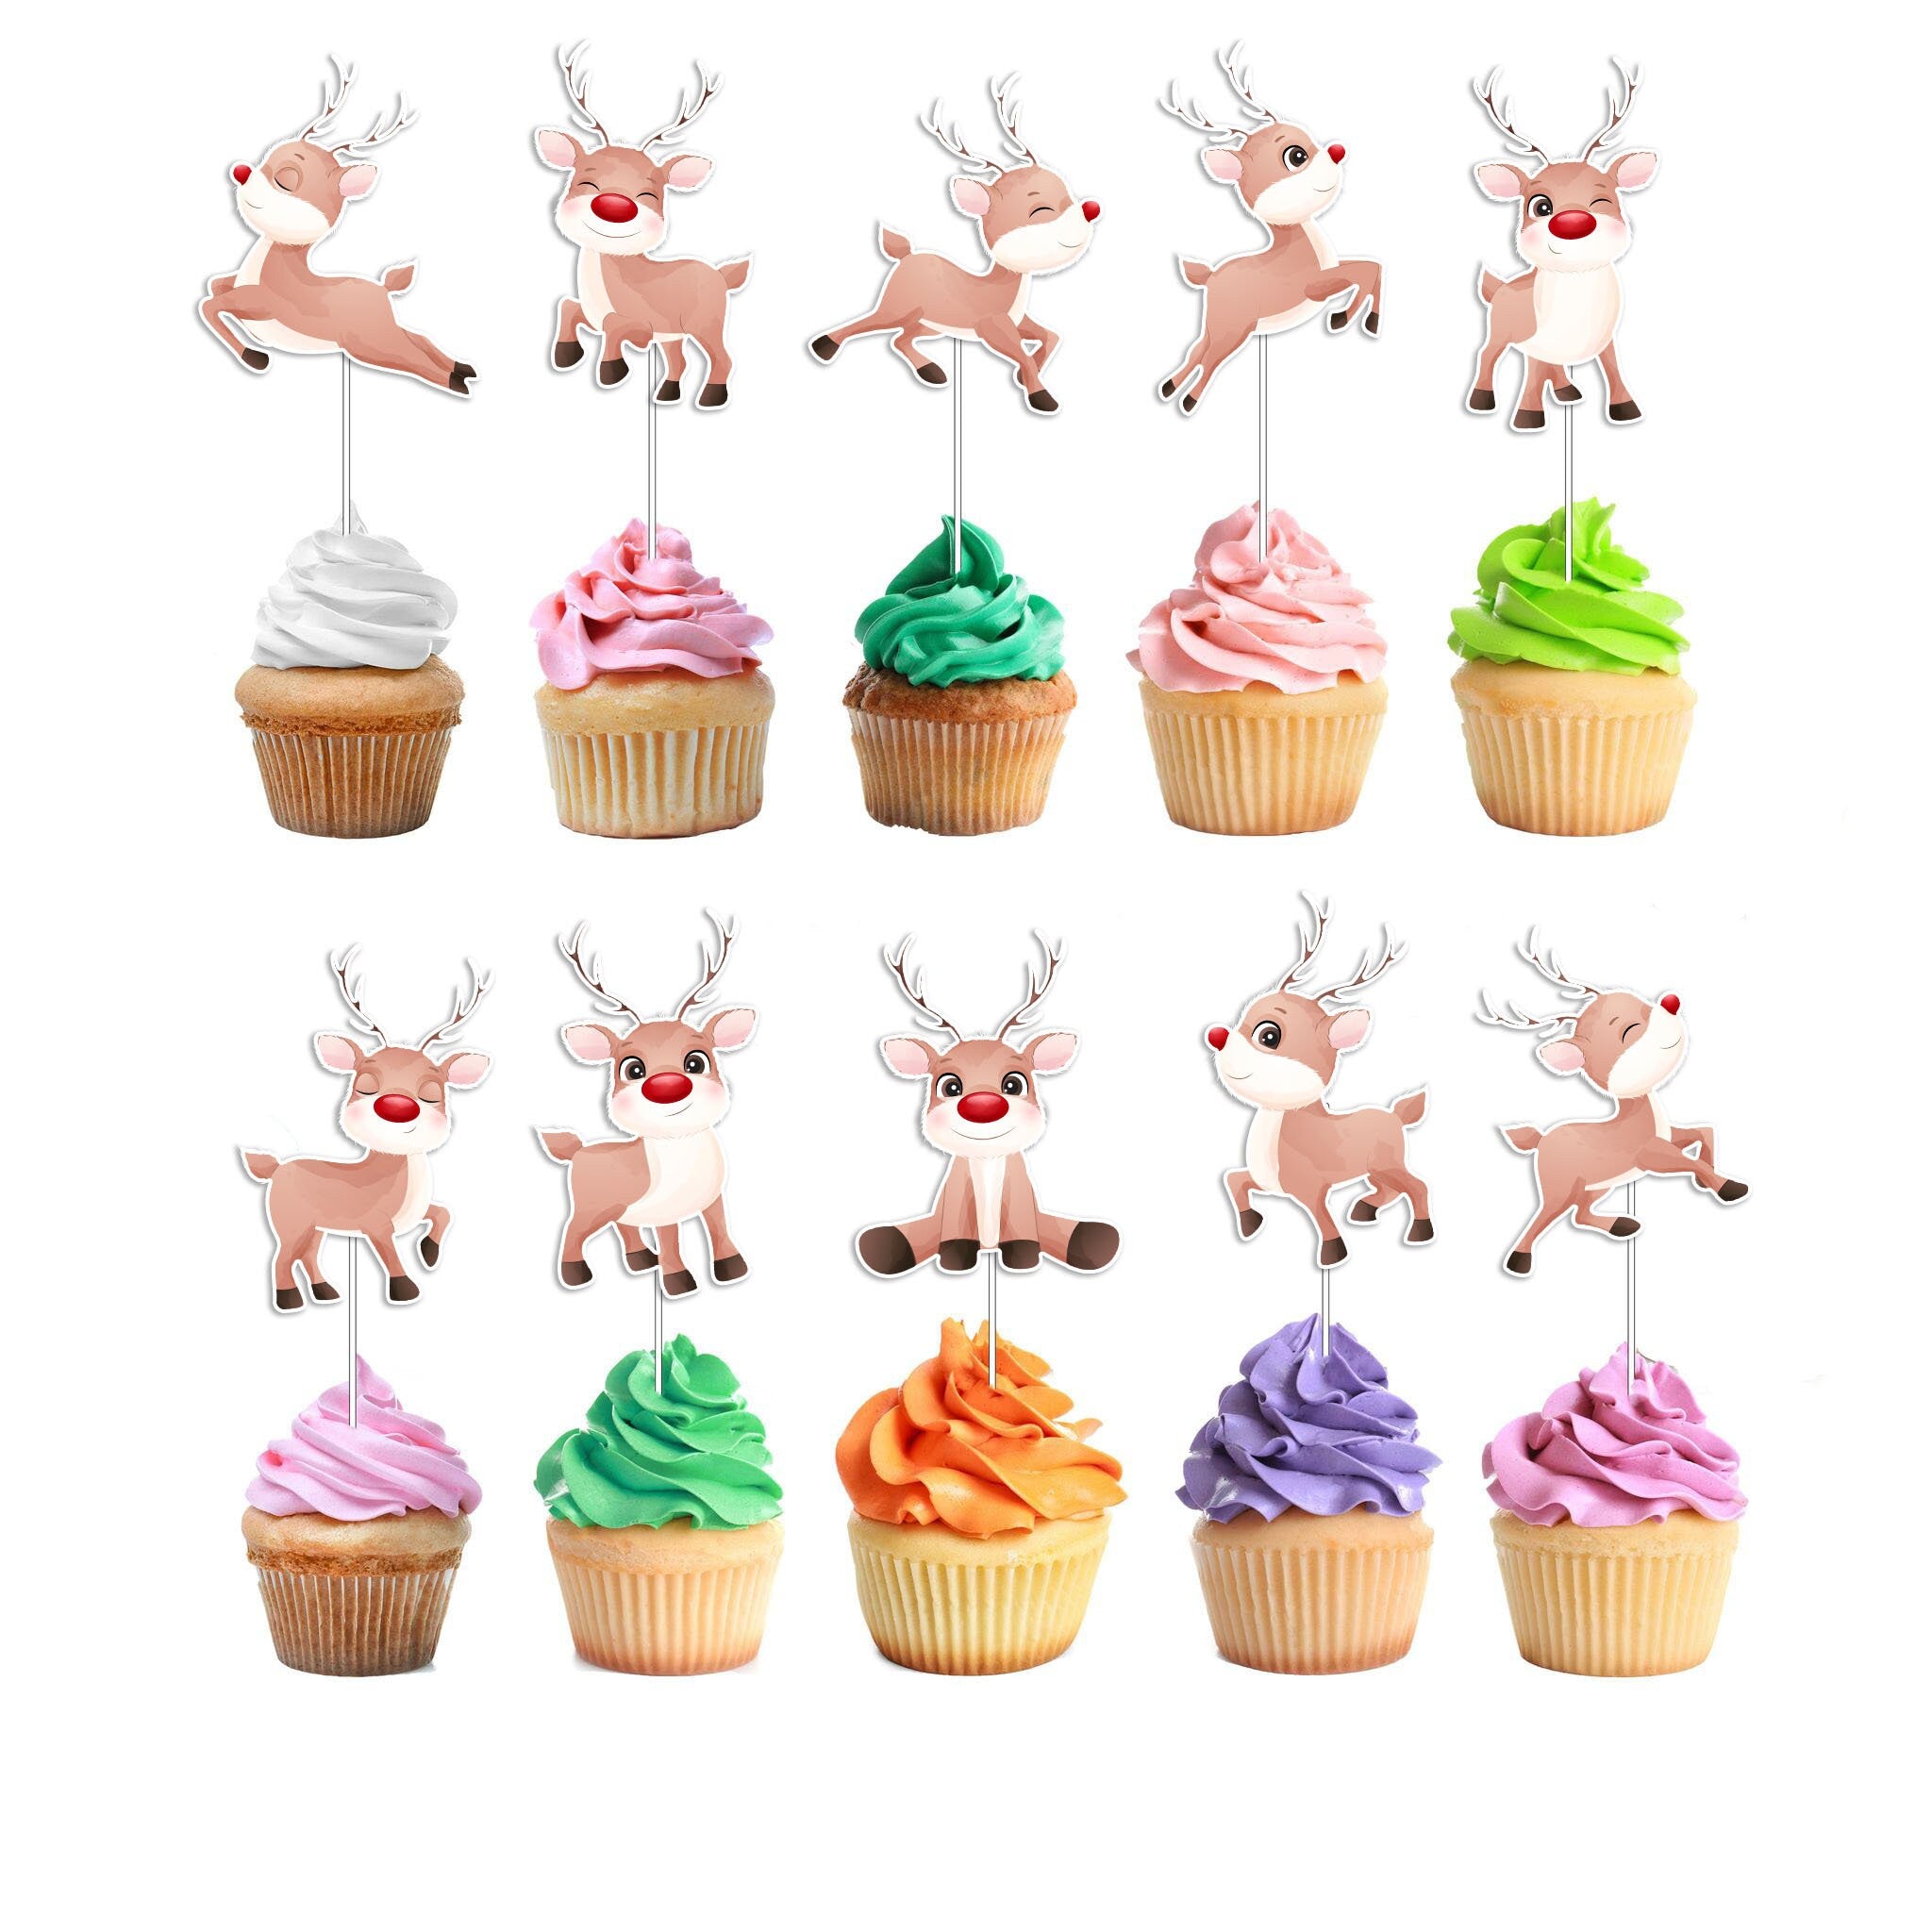 Festive Red-Nosed Reindeer Cupcake Toppers - Make Your Holiday Treats Dasher-ingly Delightful!